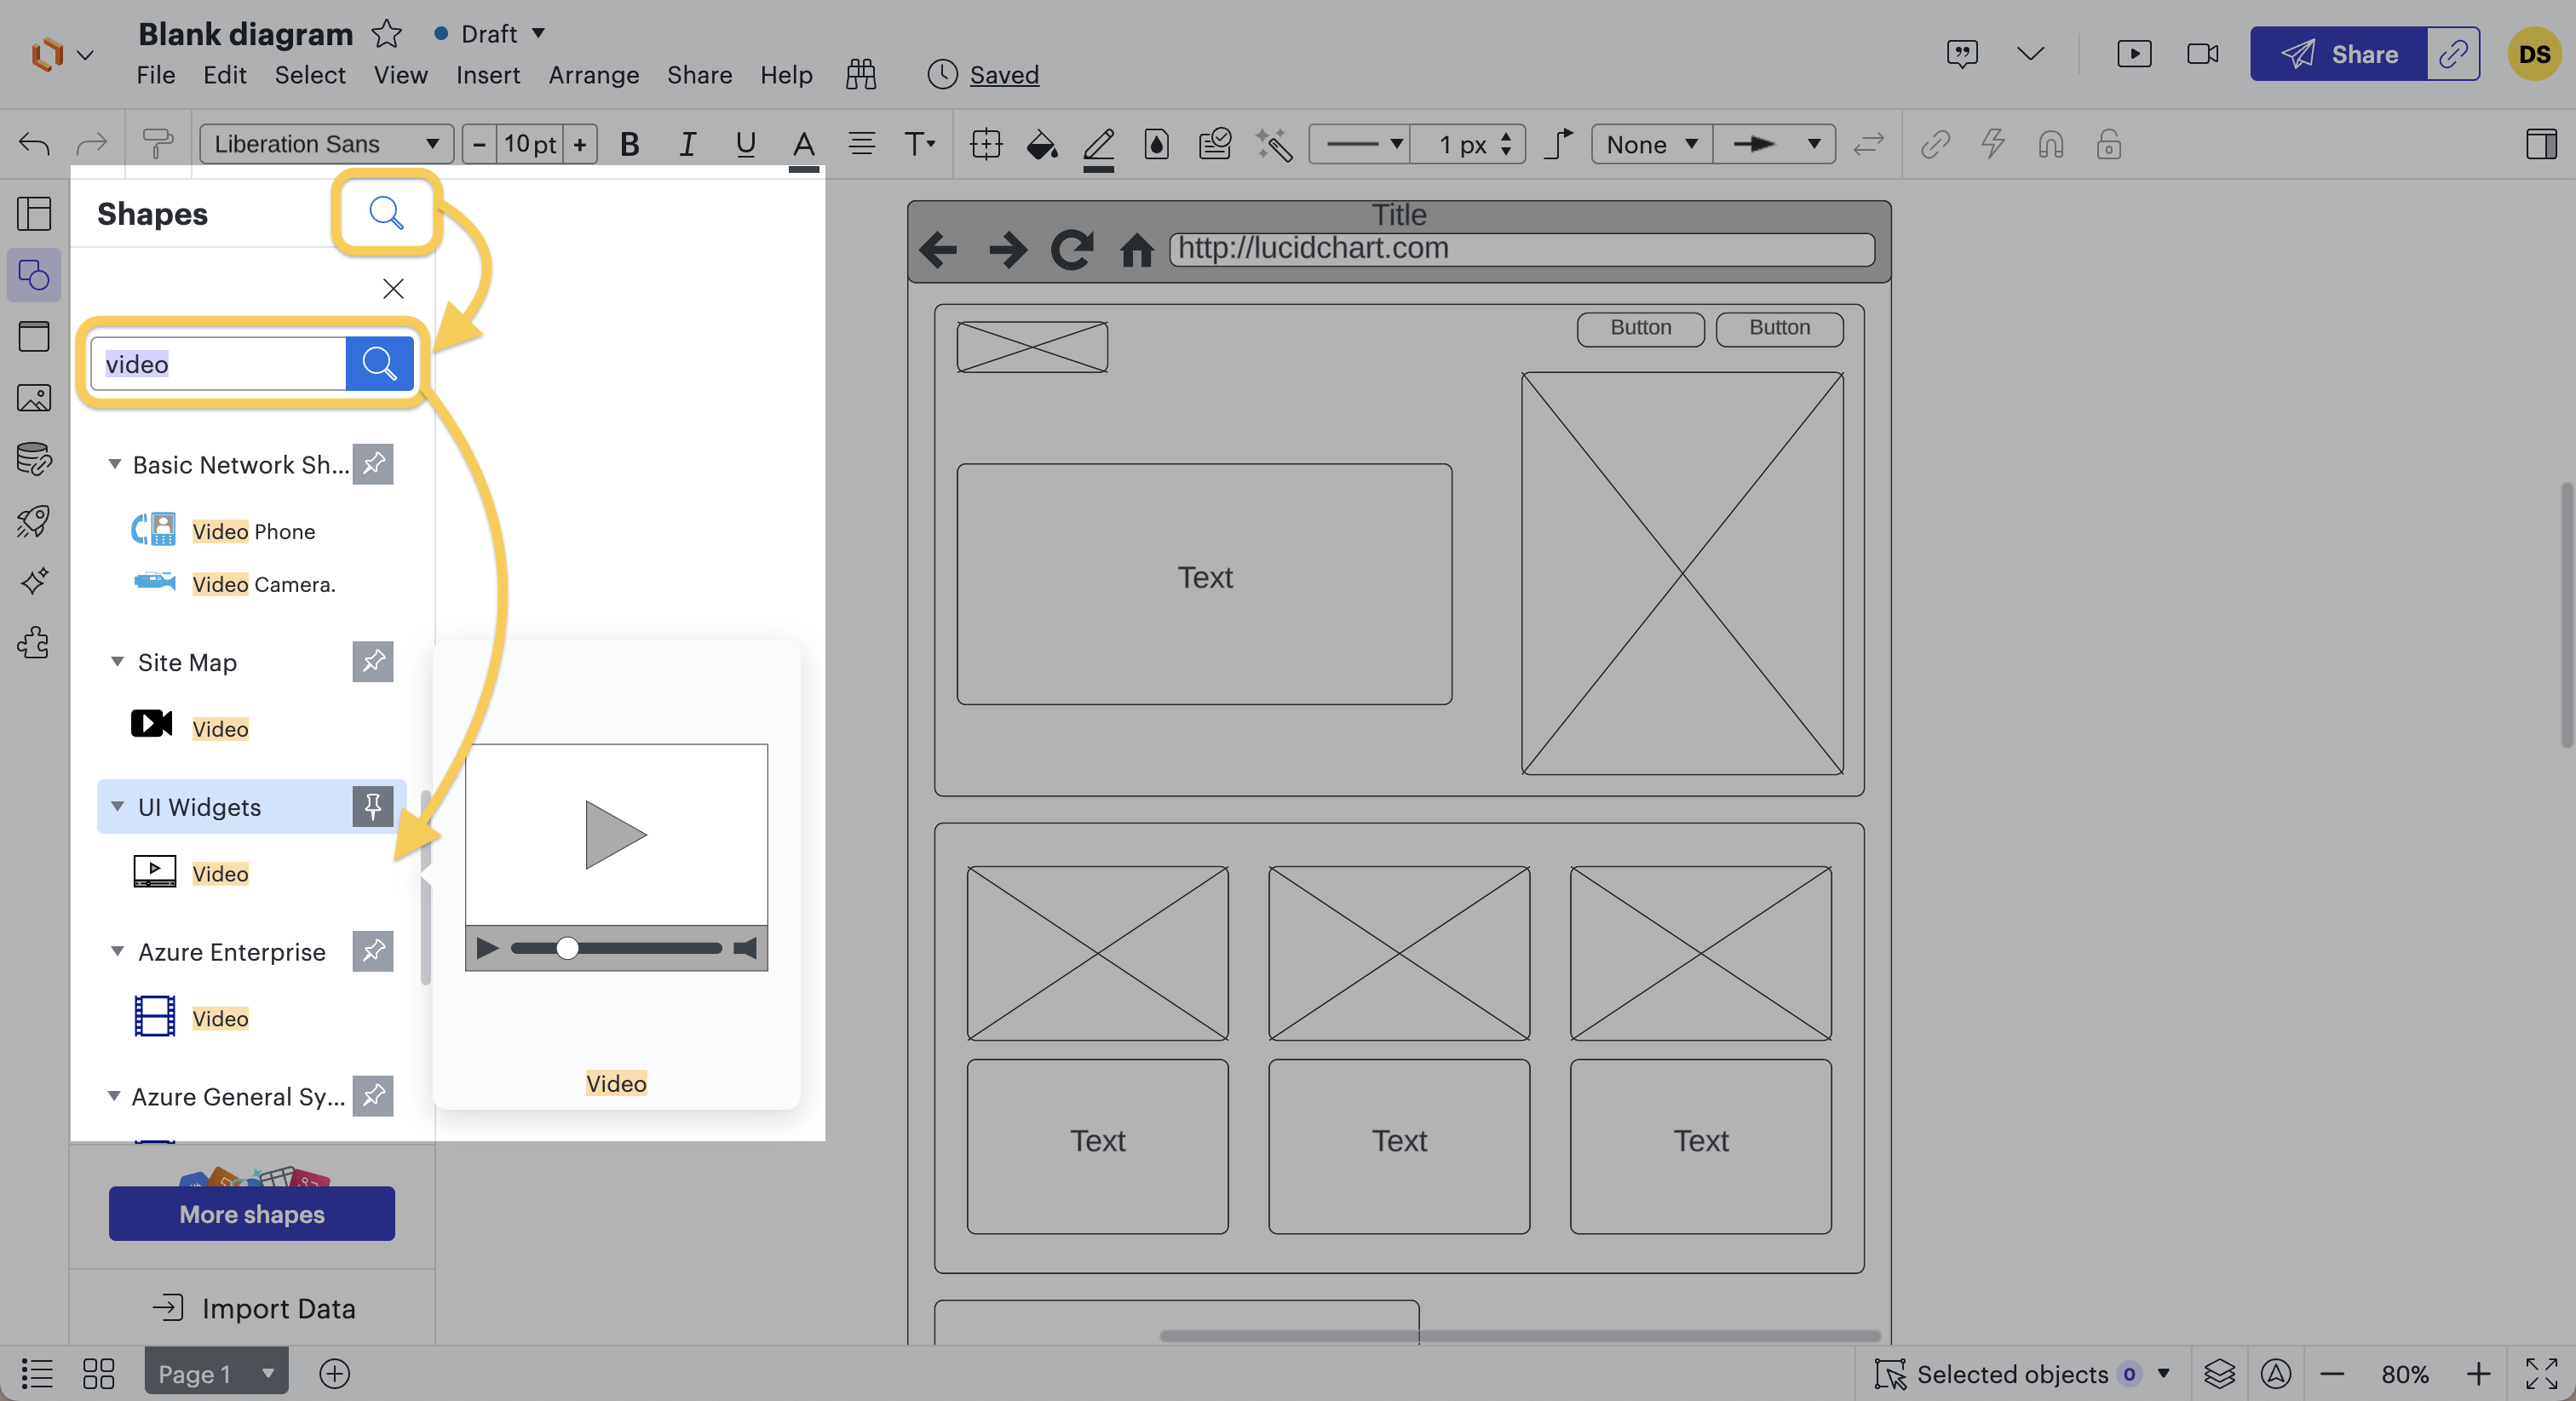 6th step to create a wireframe for a website